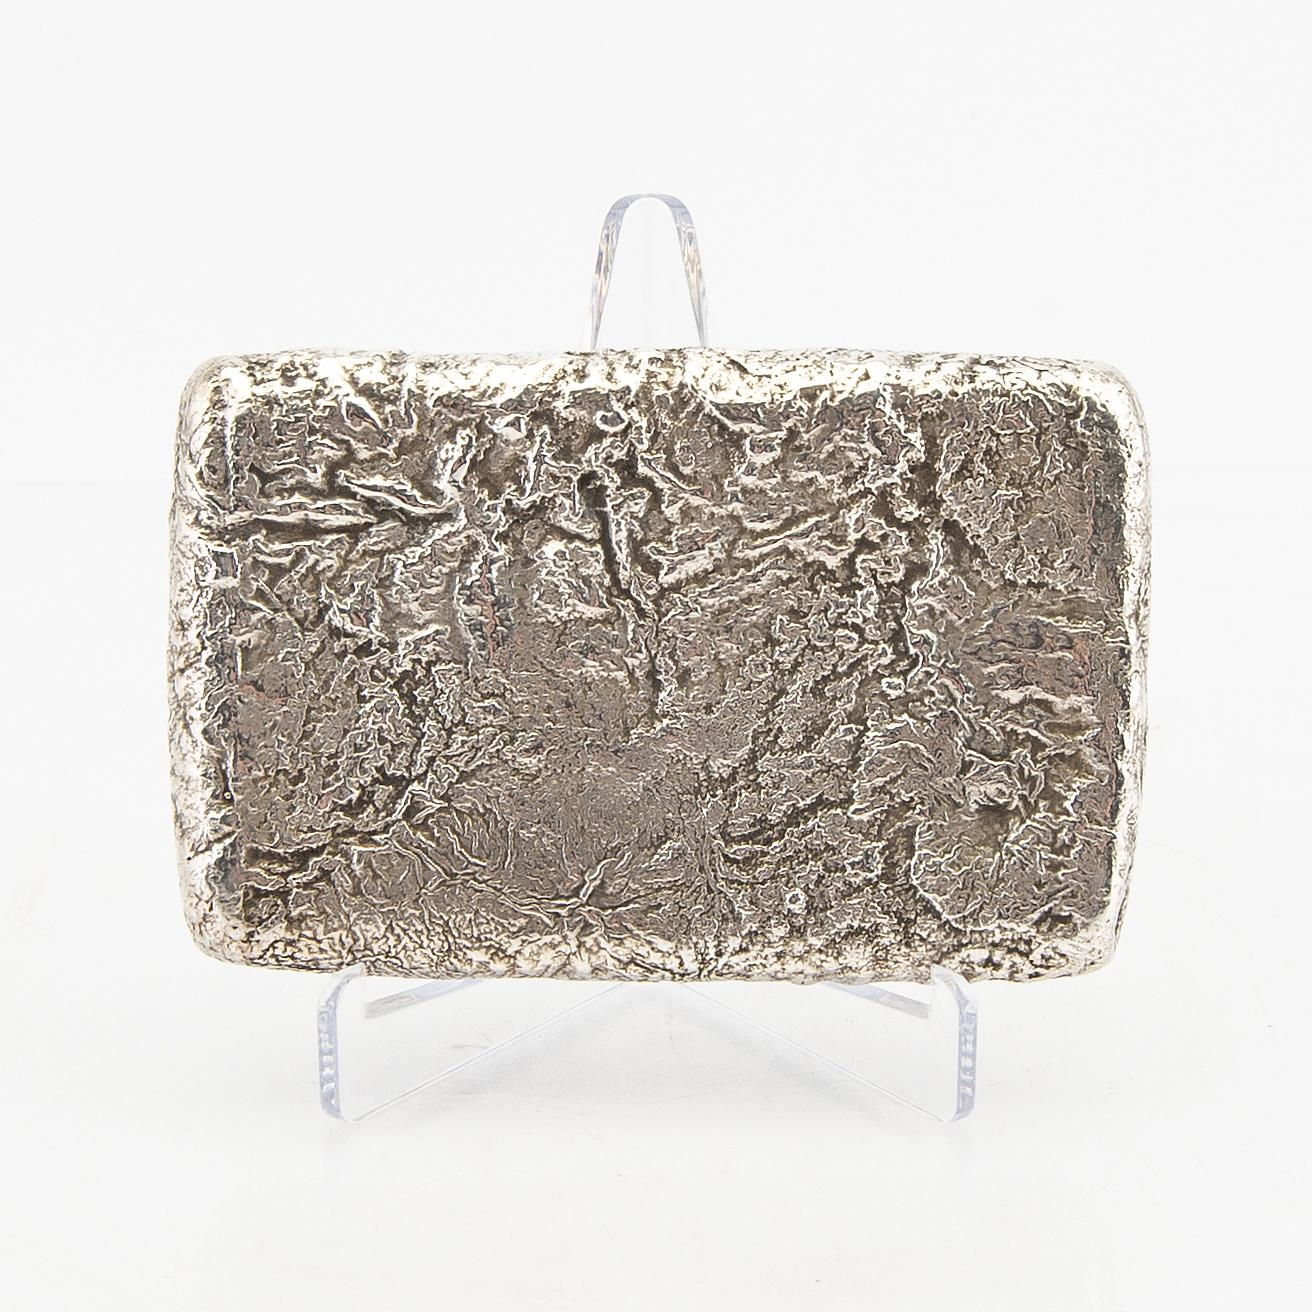 A Russian Silver Samodorok Cigarette Case Early 20th Century Russia.
the textured silver case with an inset brown red hardstone cabochon thumb piece.
God gilded interior 
Wear commensurate with age and use. Unidentified maker's mark.